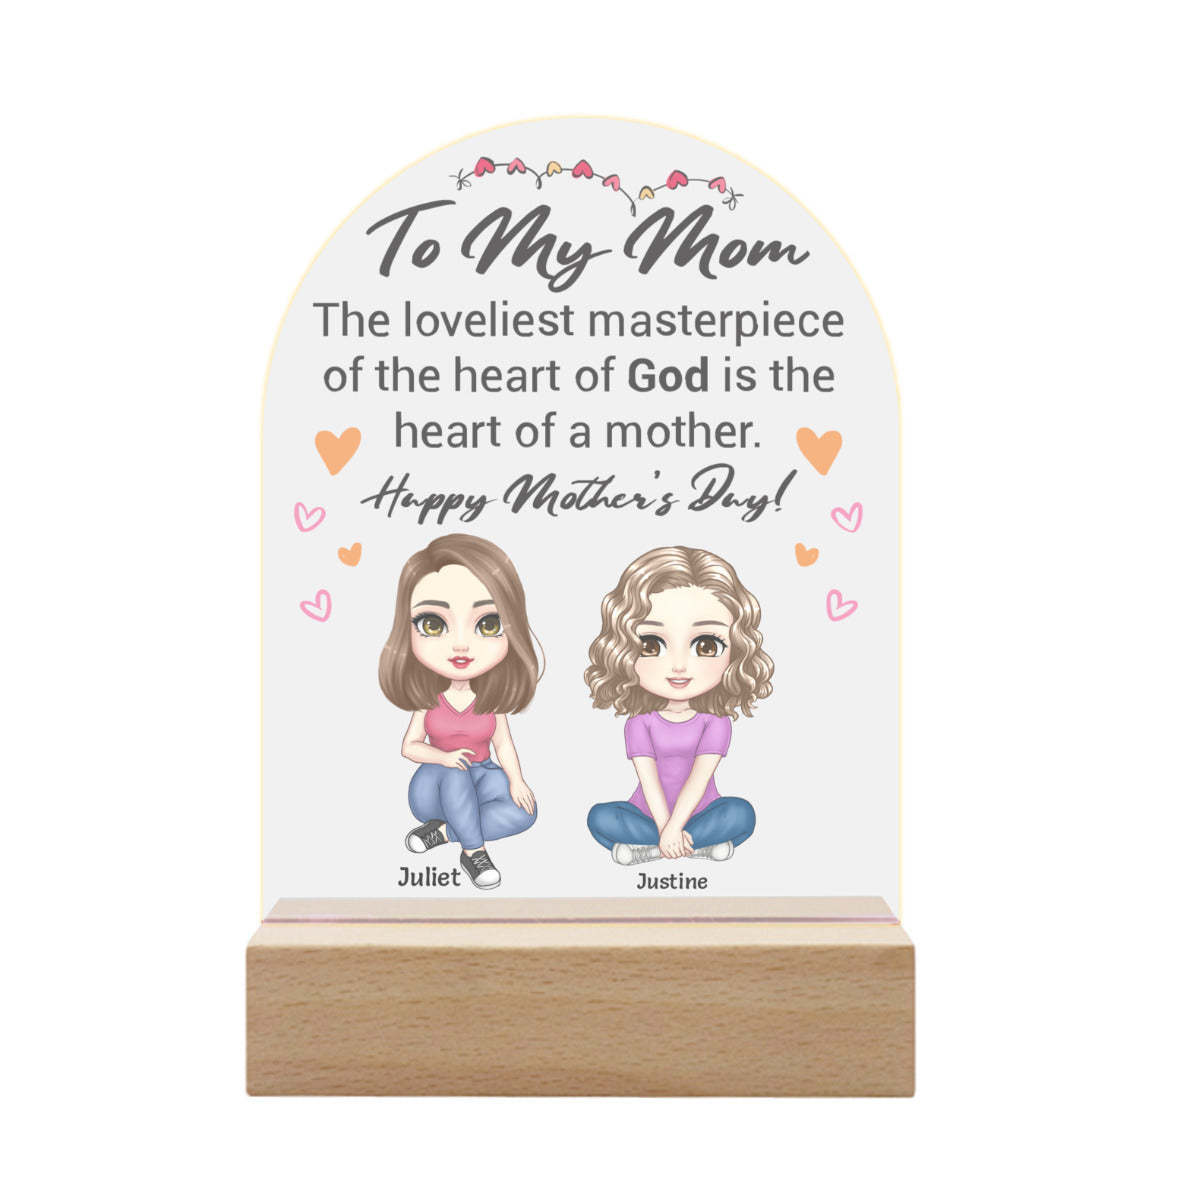 The Loveliest Masterpiece- Personalized Acrylic Plaque Night Light for Mom